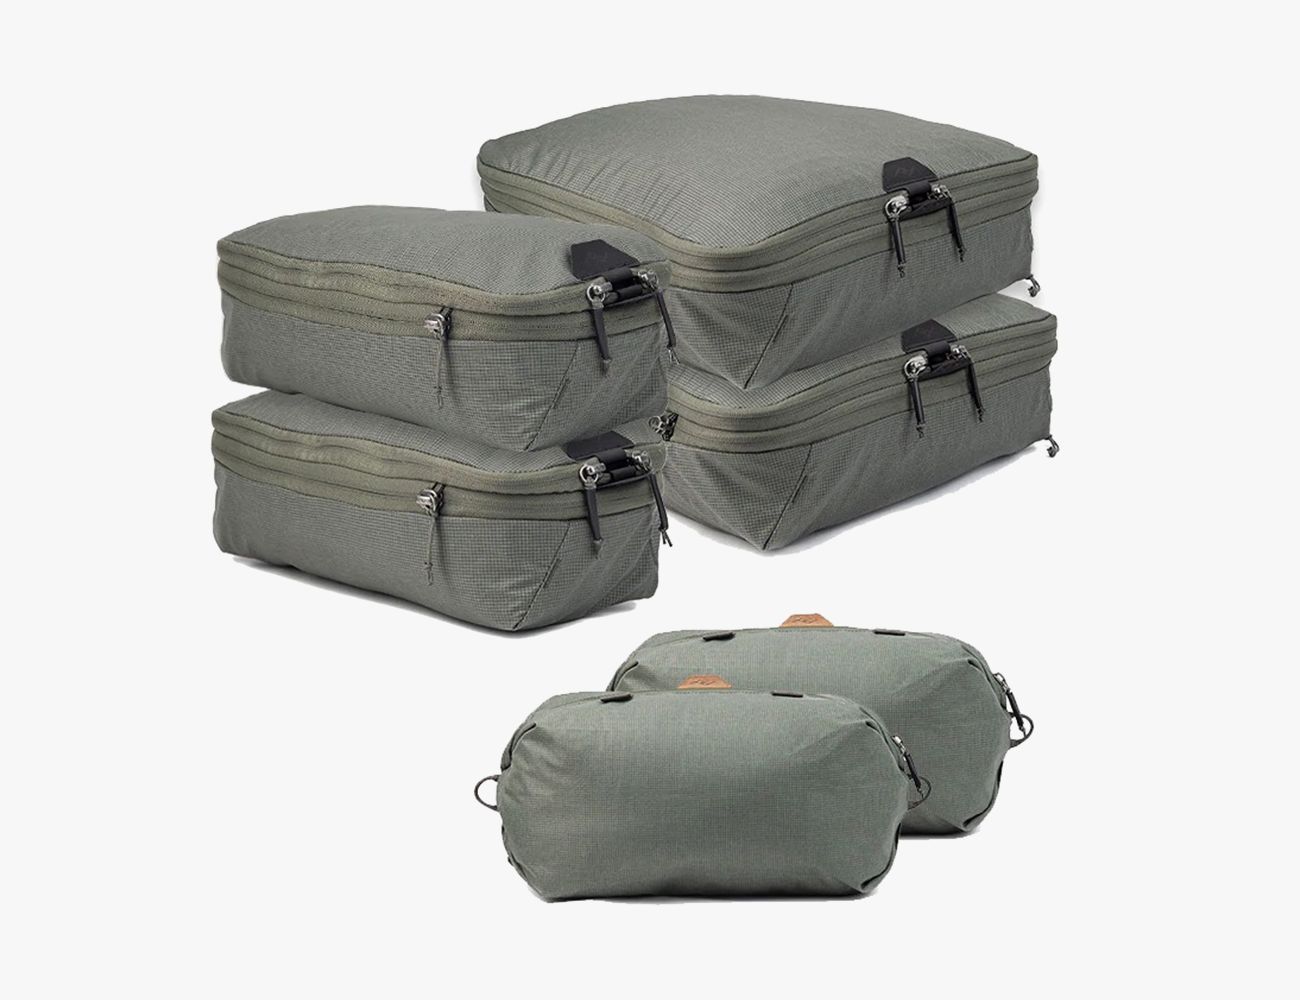 The Best Packing Cubes of 2024, Tested and Reviewed